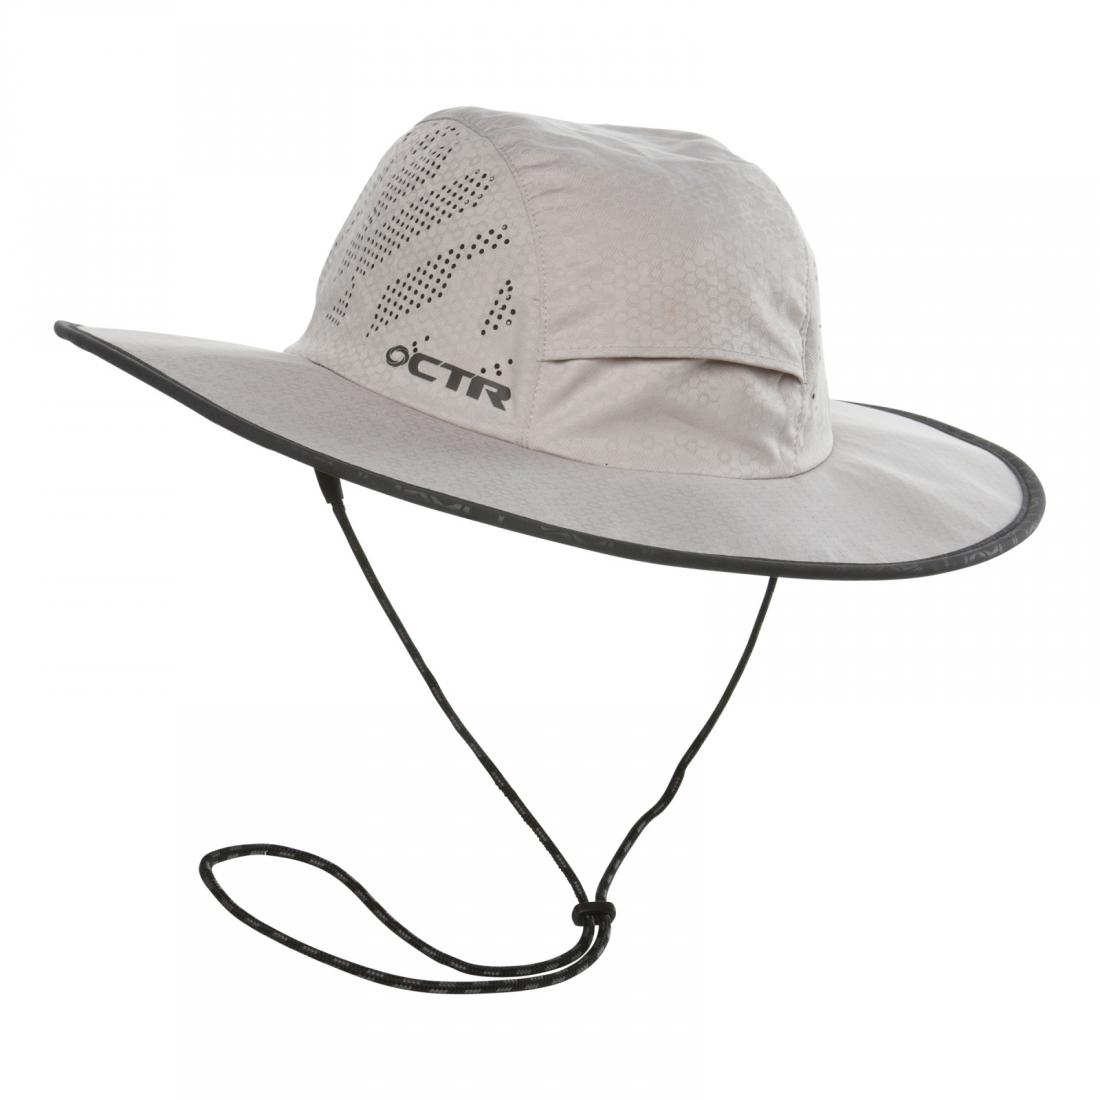 Панама Chaos  Summit Expedition Hat Chaos CTR, цвет серый, размер L-XL